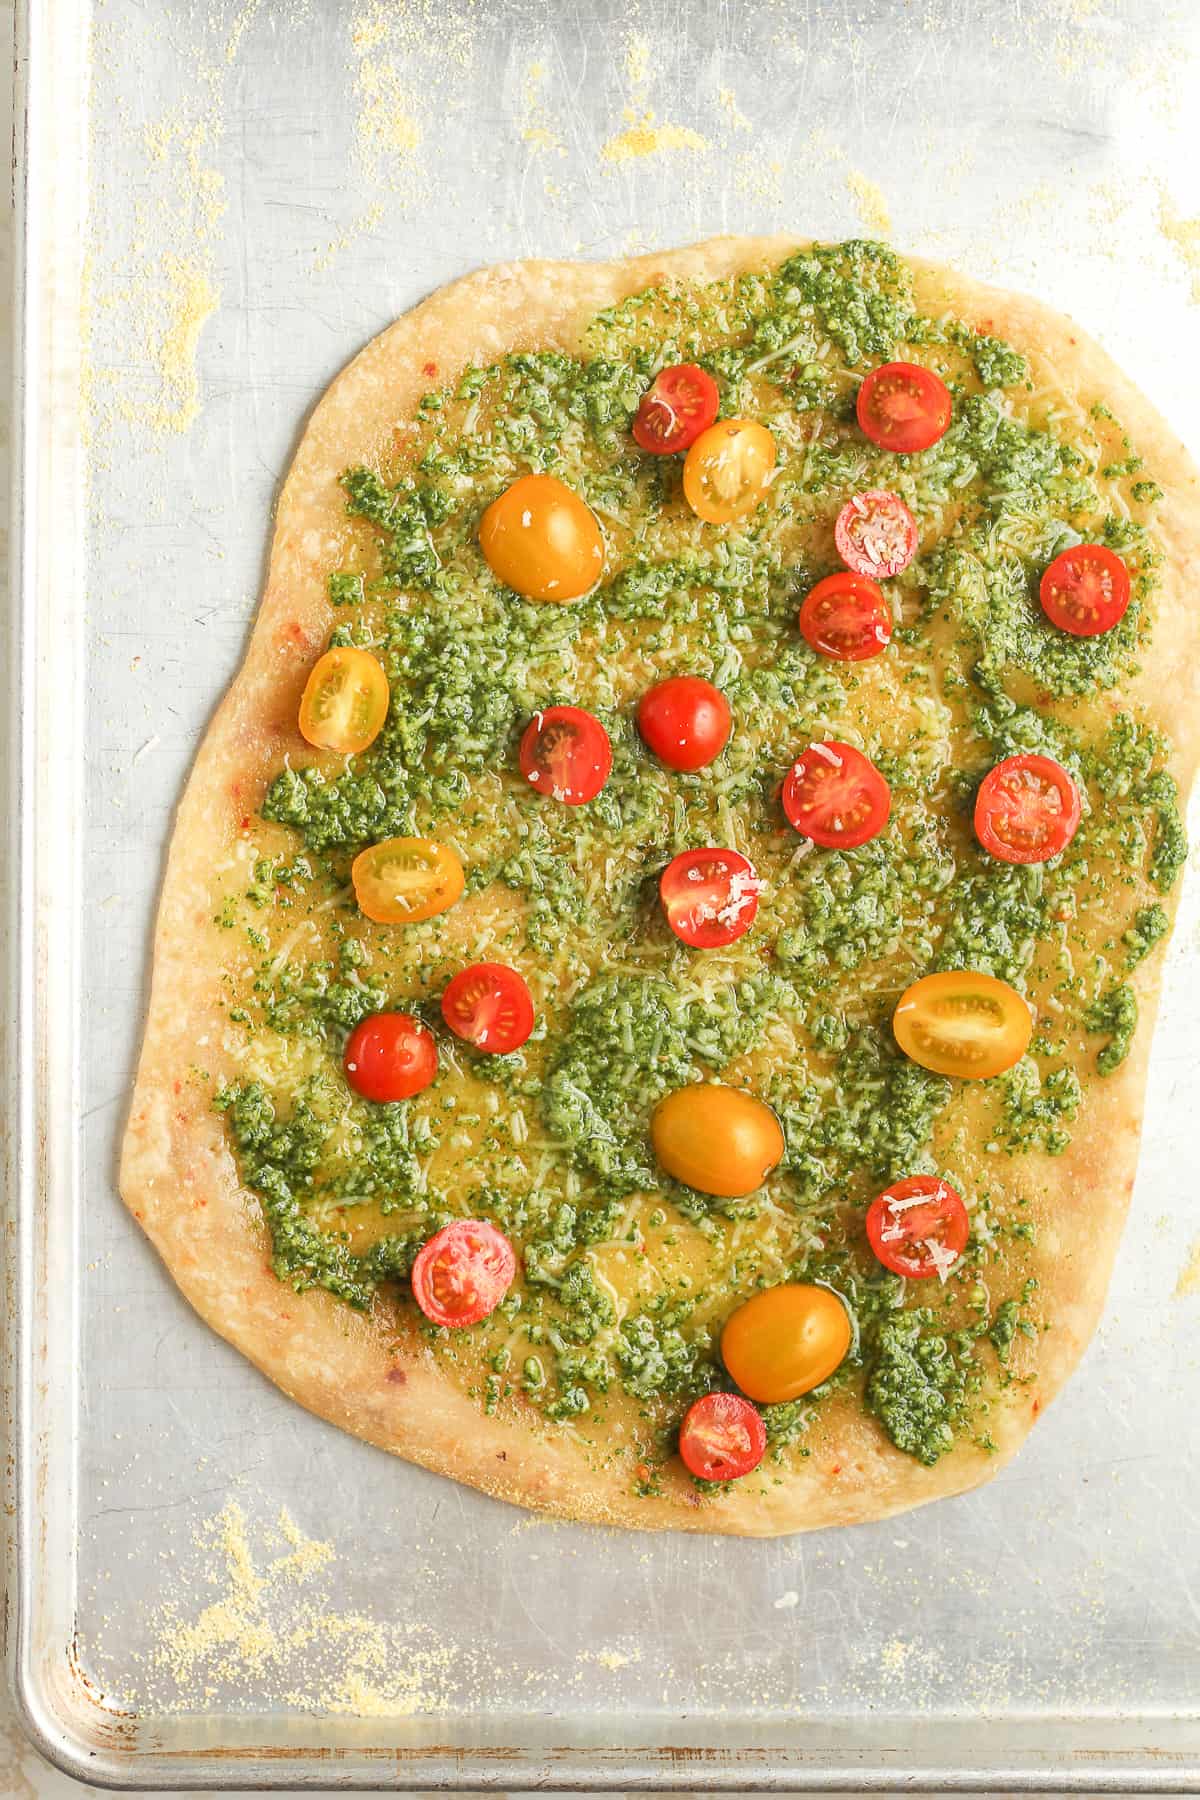 The flatbread crust after pre-baking with pesto and tomatoes.